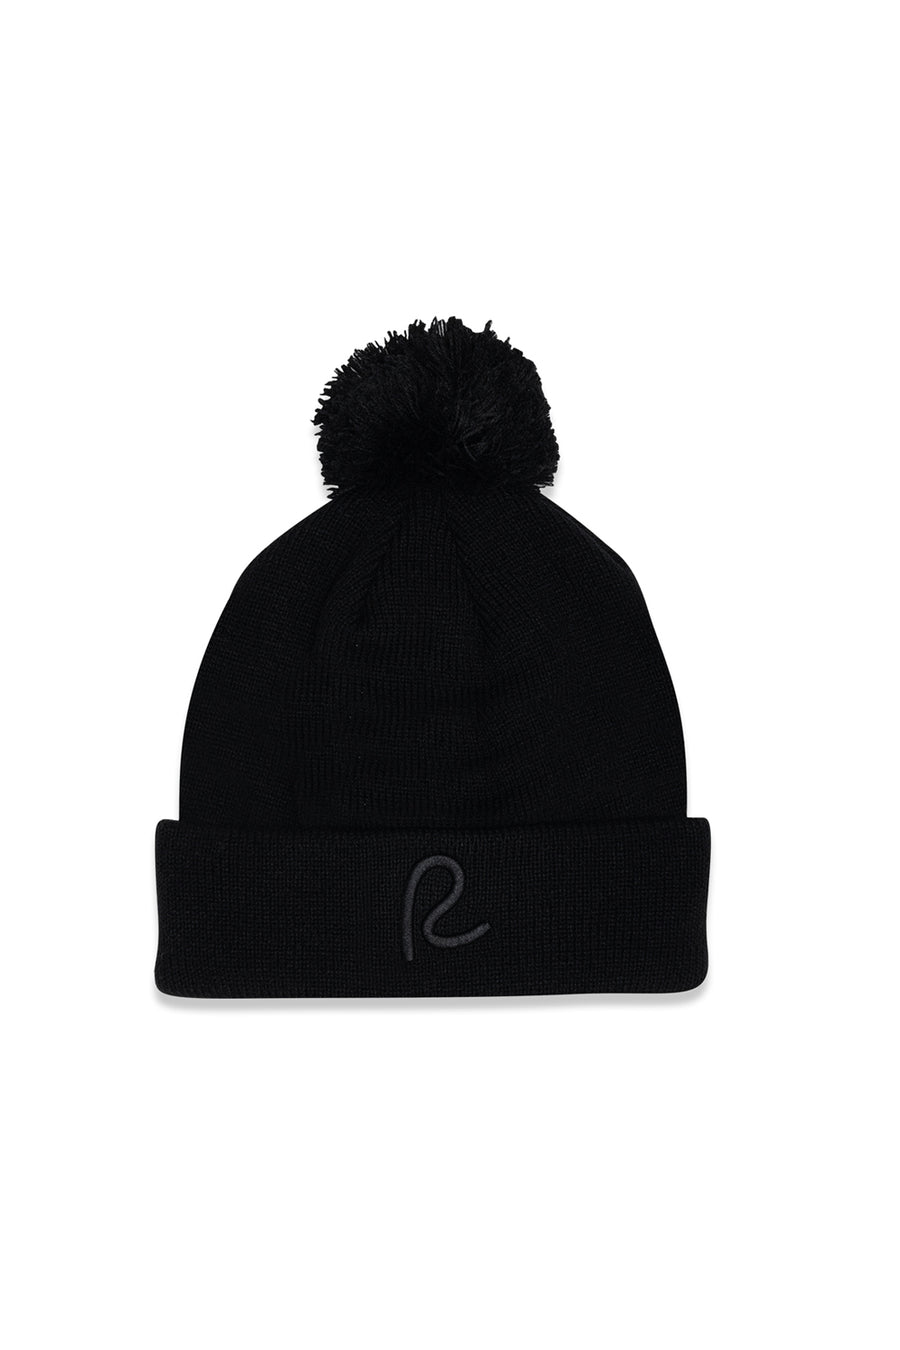 Rewired Bobble Hat - Black Tonal - Front View